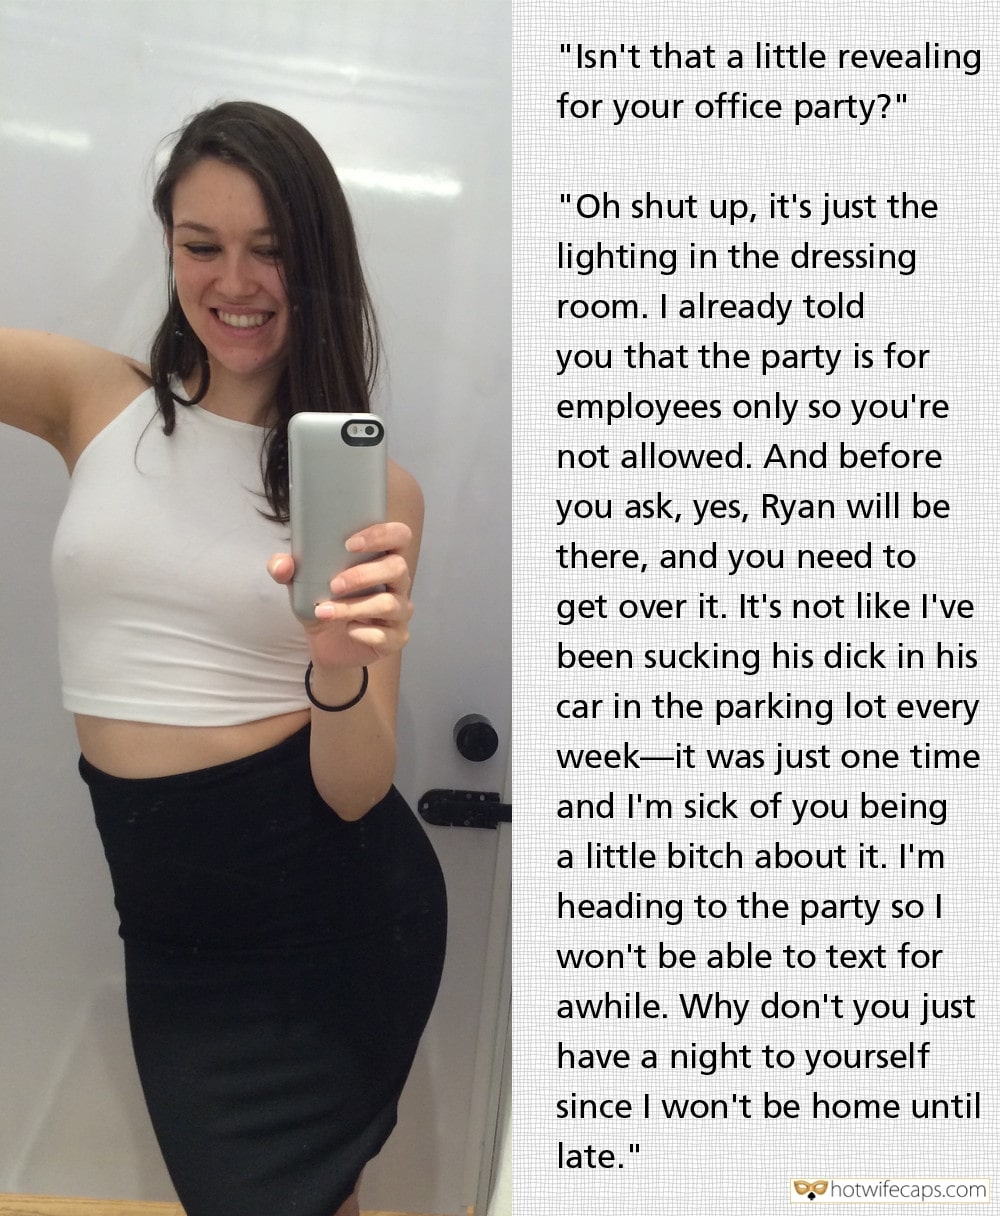 Sexy Memes Humiliation Dirty Talk Boss hotwife caption: “Isn’t that a little revealing for your office party?” “Oh shut up, it’s just the lighting in the dressing room. I already told you that the party is for employees only so you’re not allowed. And before you ask, yes,...